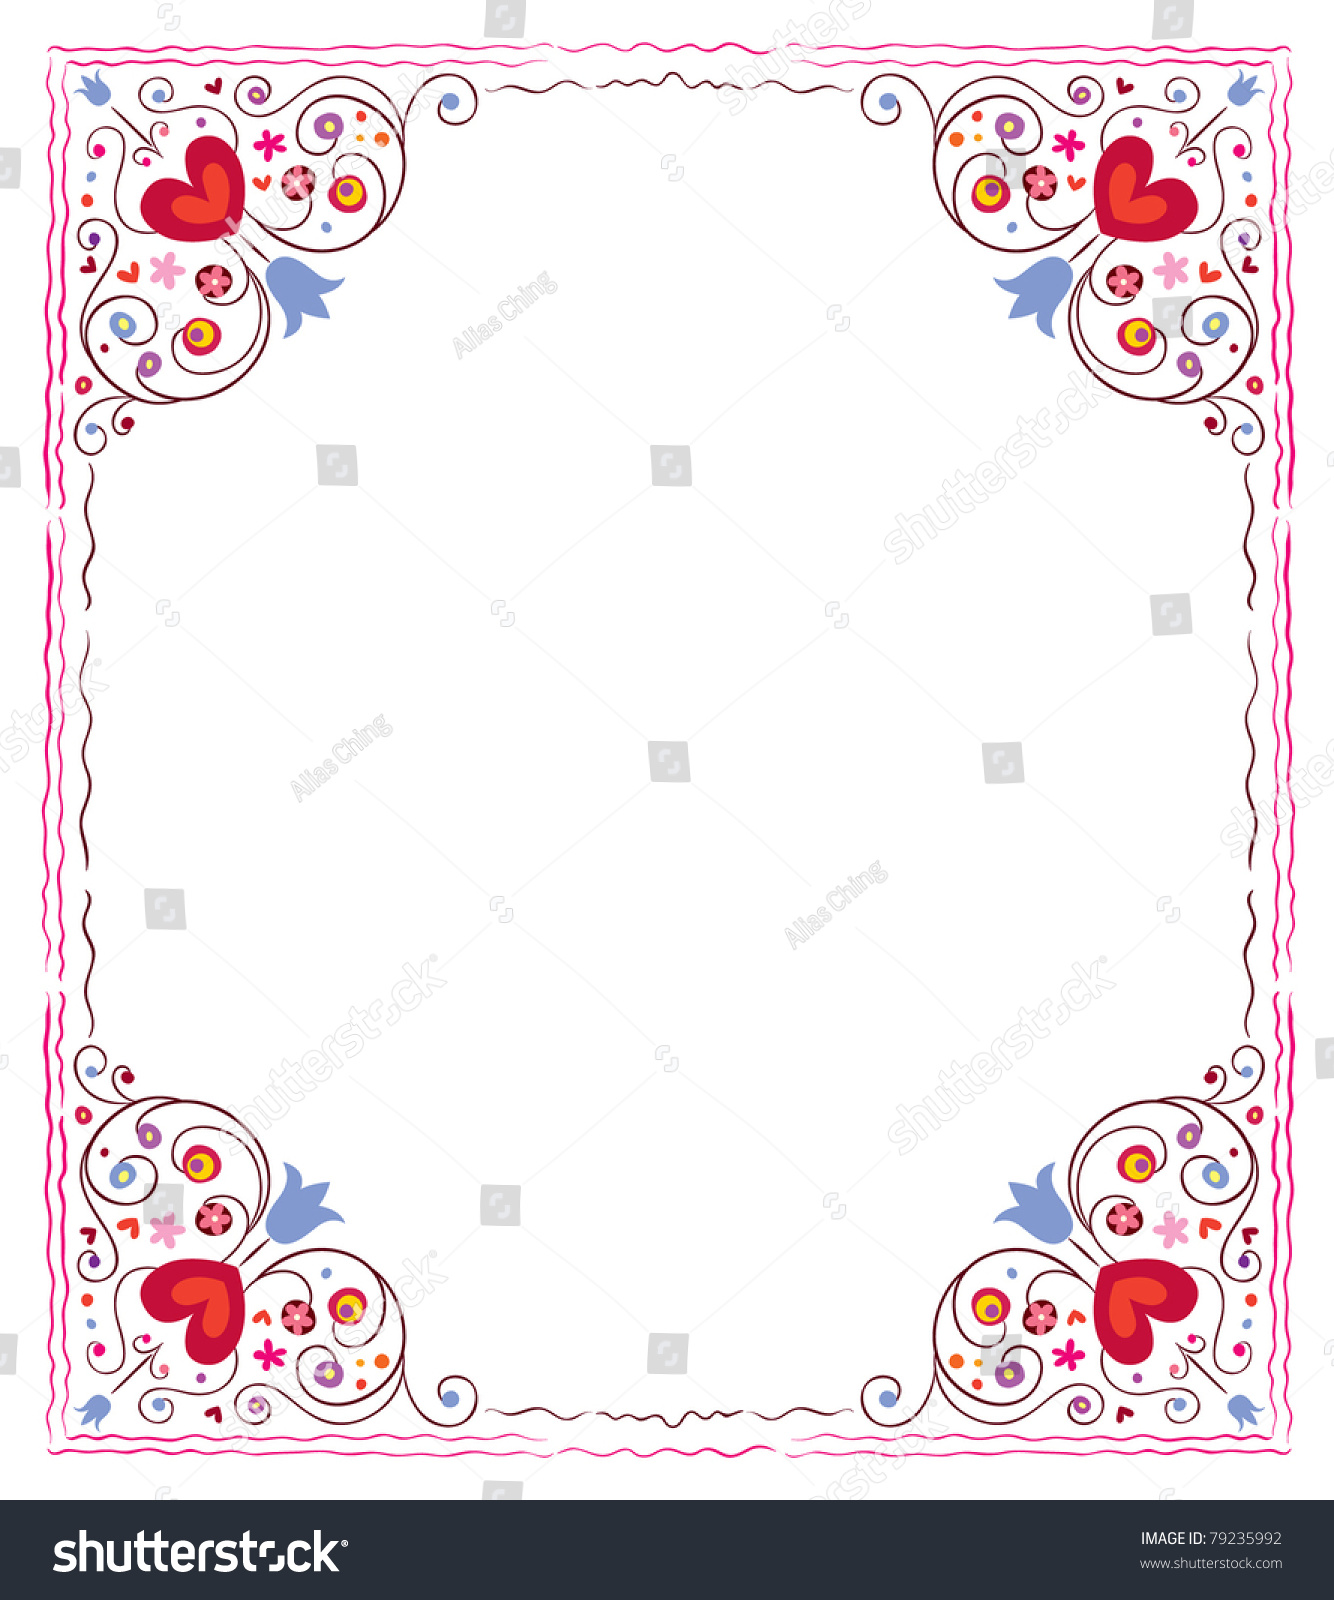 Abstract Hearts And Flowers Frame Stock Vector Illustration 79235992 ...